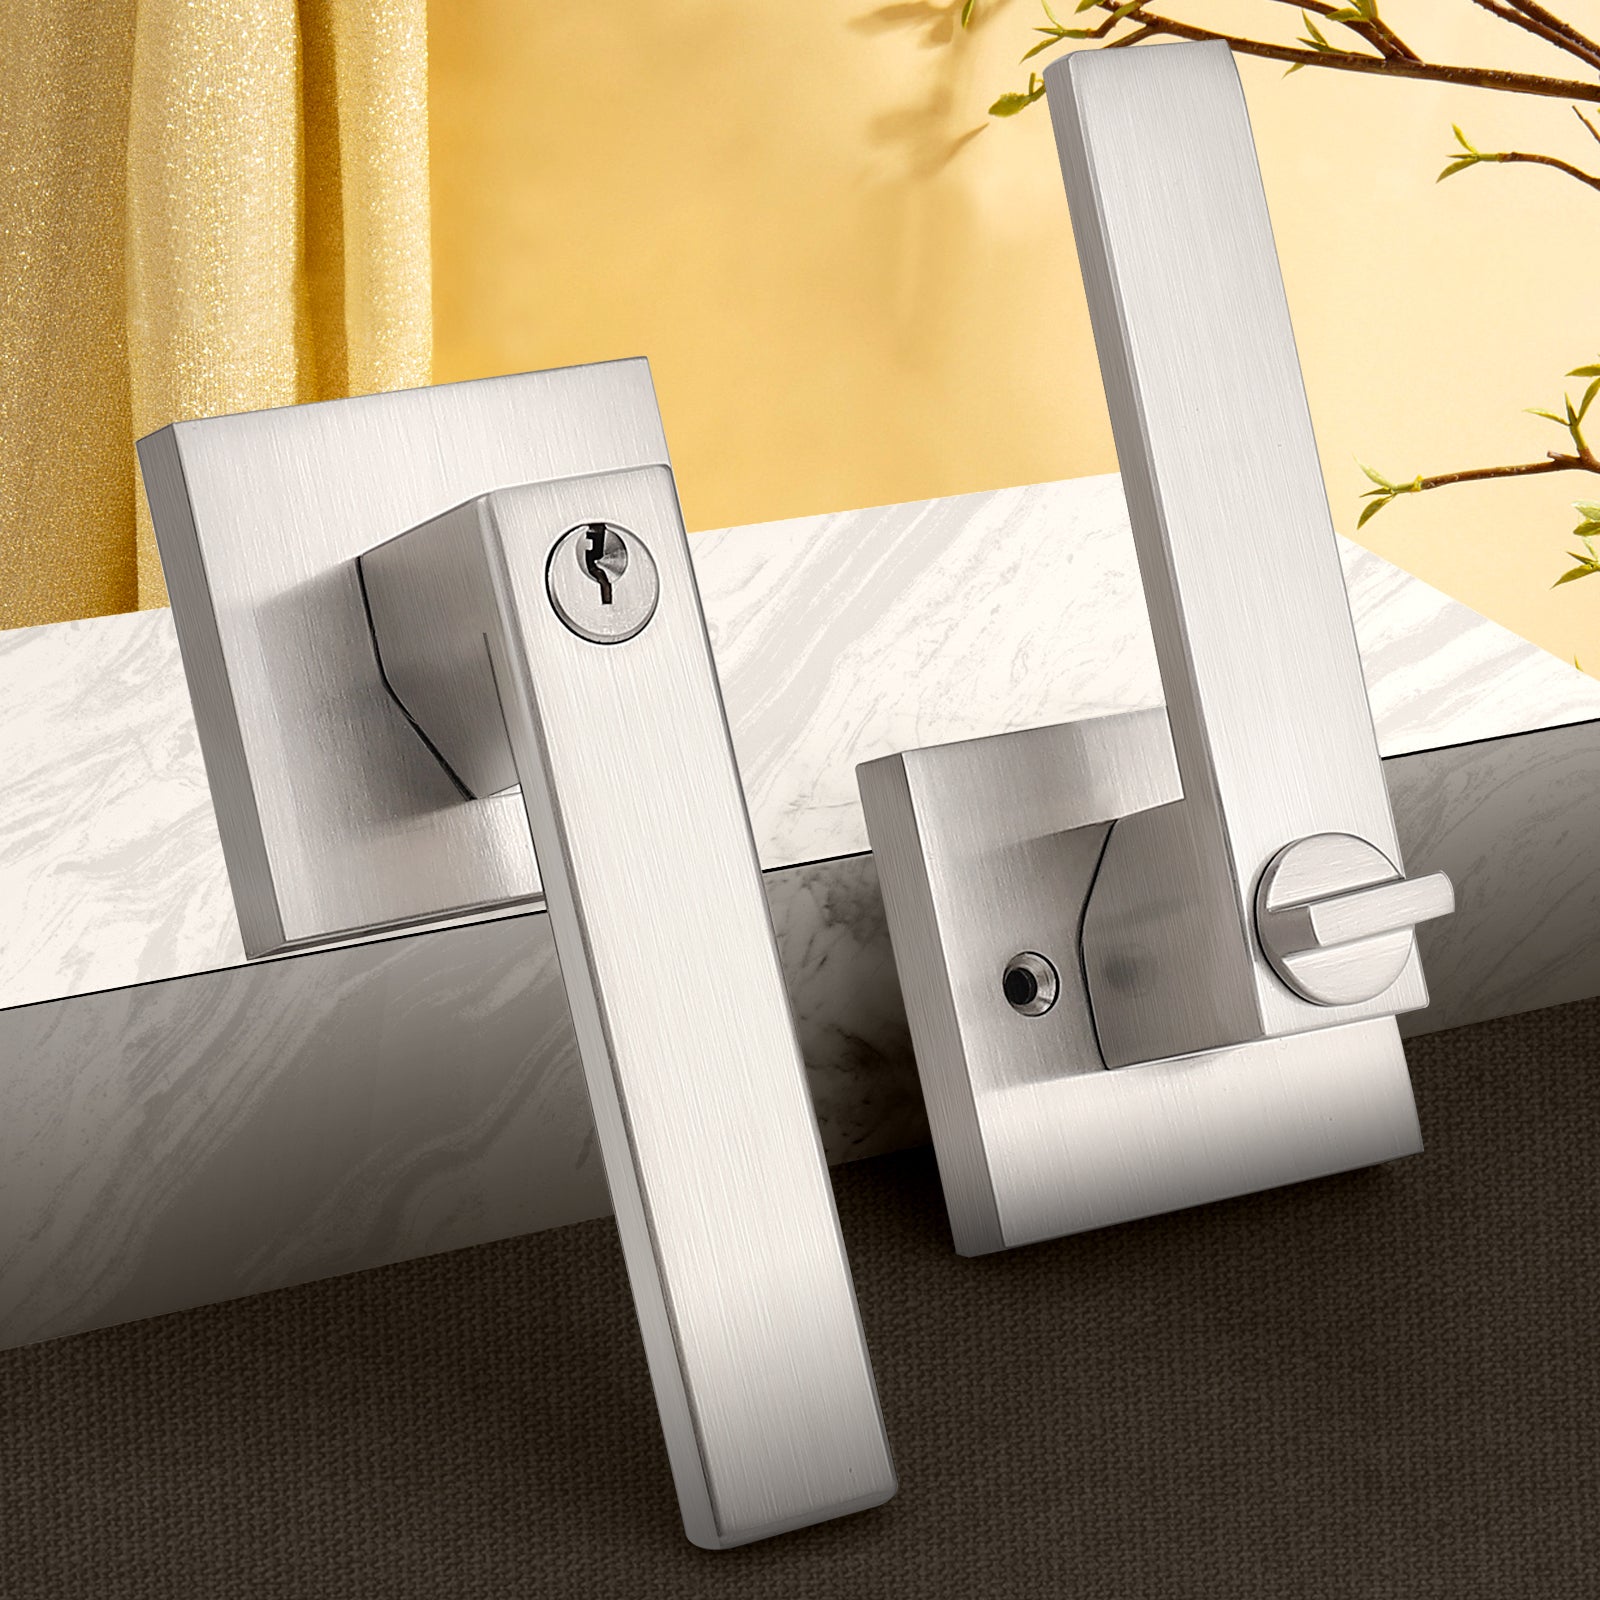 Heavy Duty Door Handles Brushed Nickel Finish, Entry Keyed Lock/ Privacy/Passage/Dummy Function, DL01SN